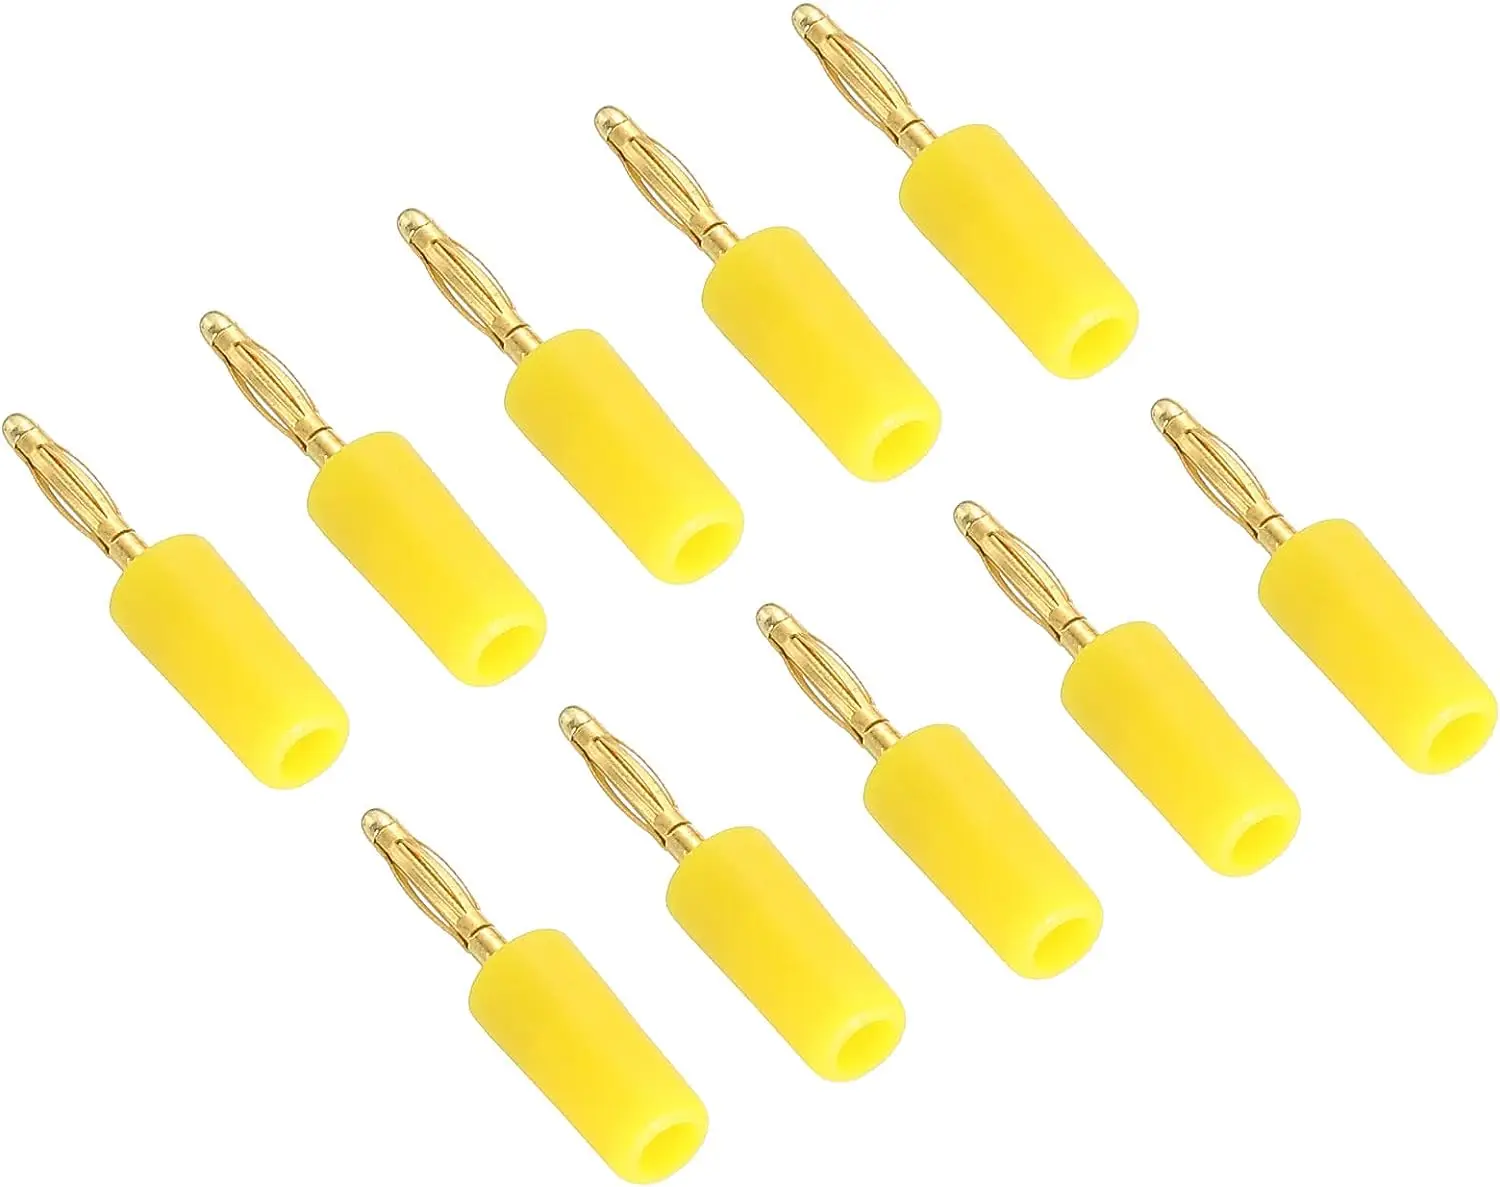 

10 Pack Banana Plugs Connector Speaker Banana Plug Connectors Solder Type 2mm Gold-Plated Copper Yellow for Speaker Wires